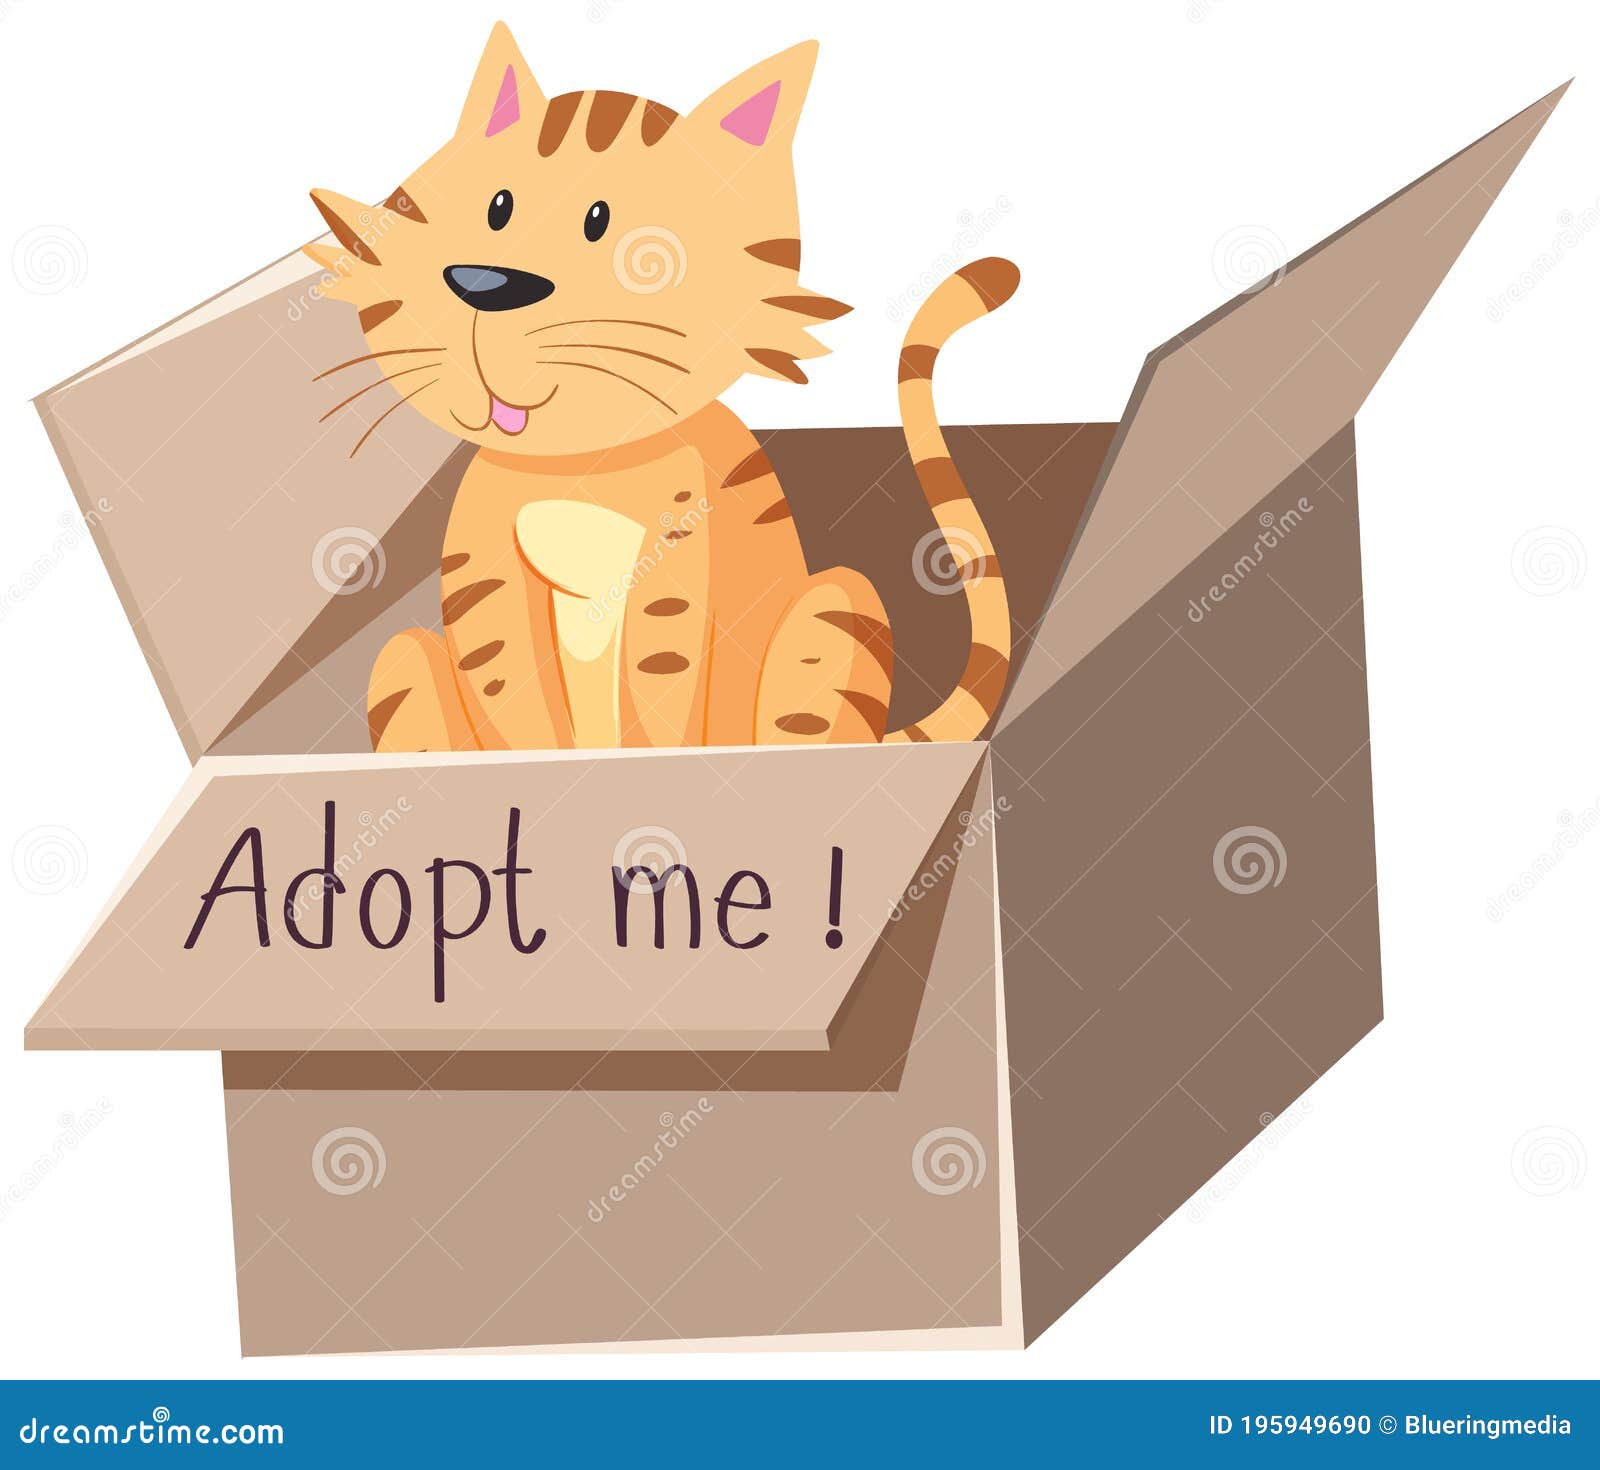 Cute Cat or Kitten in the Box with Adopt Me Text on the Box ...